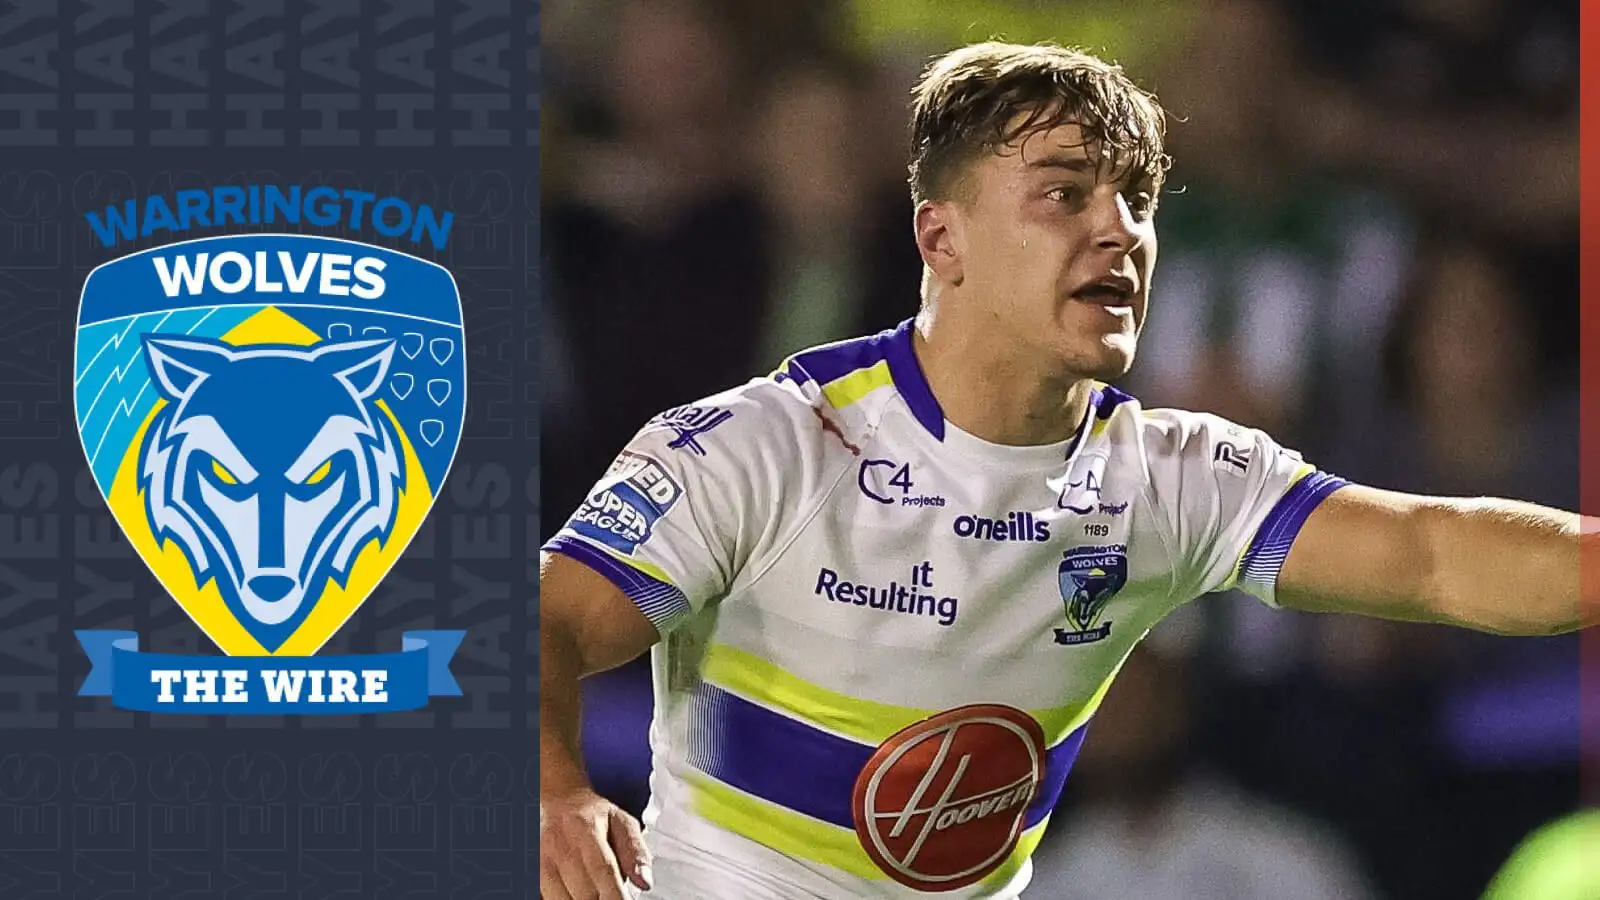 Warrington Wolves youngster providing bright spark for the future: ‘Important for the club moving forward’